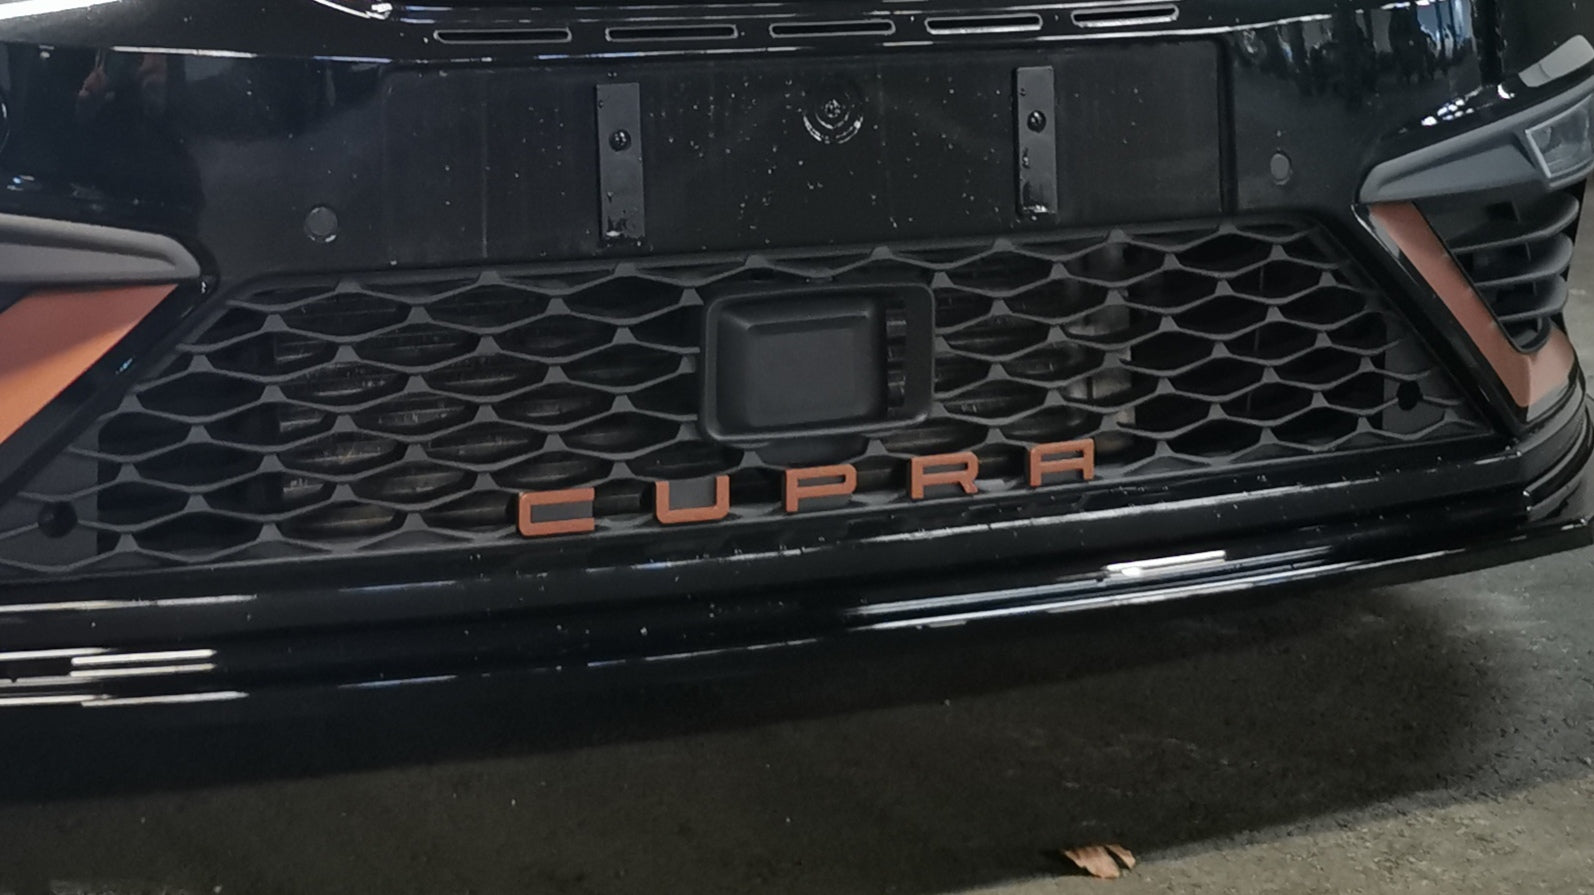 Original Cupra lettering for the front grille in Cupra copper with click system